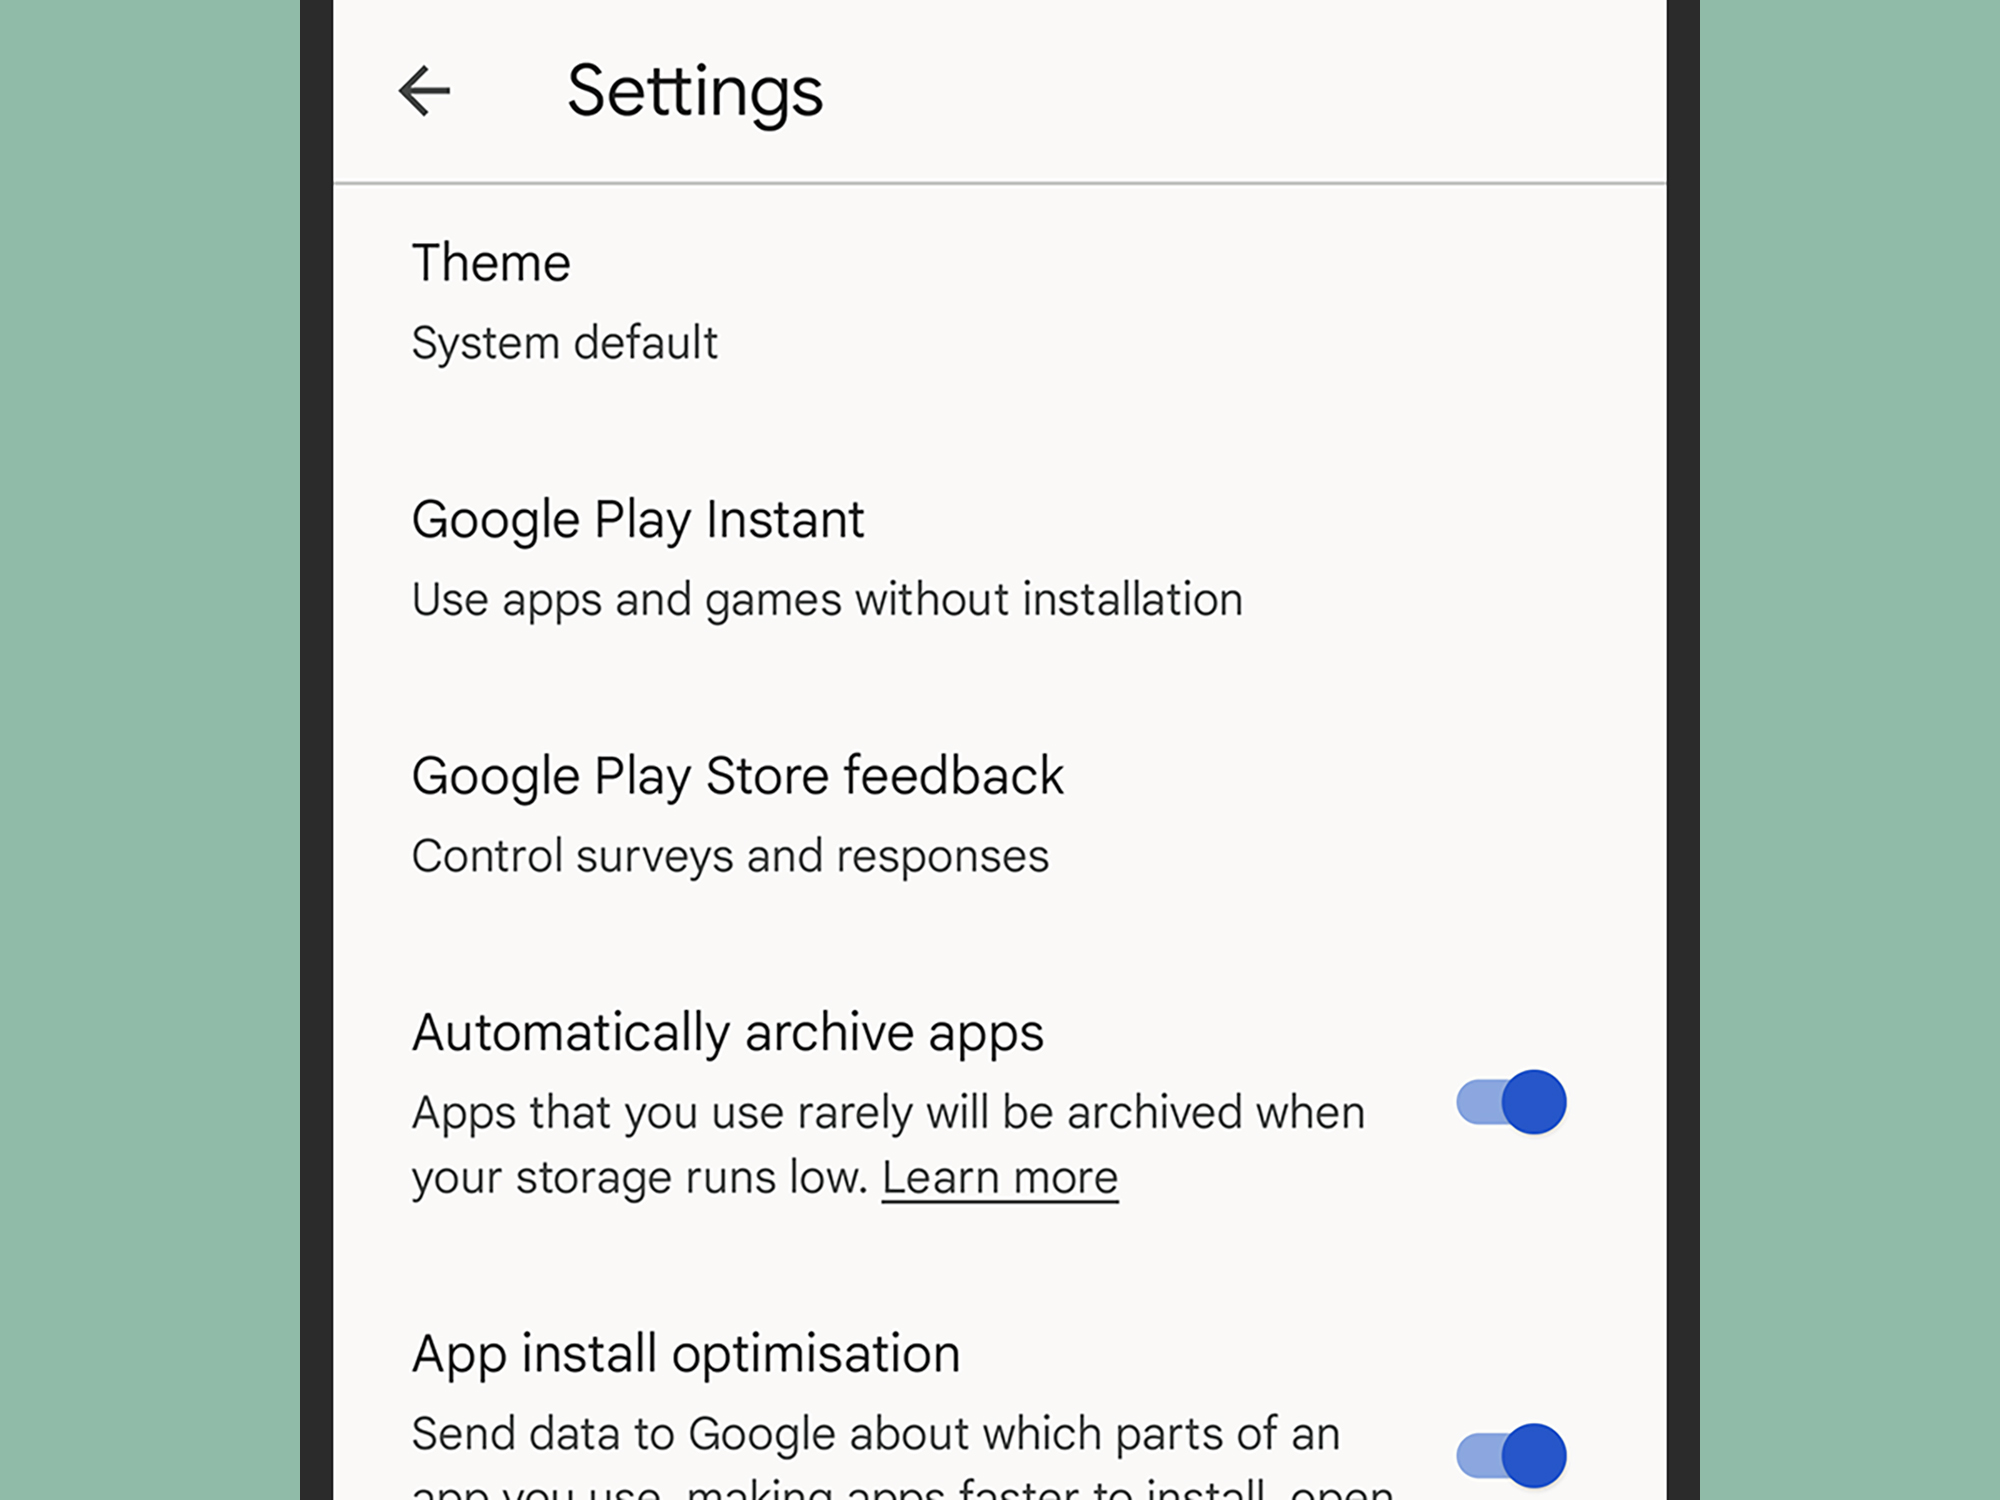 The Android settings screen, showing options for automatically archiving apps when they've been unused for a while.